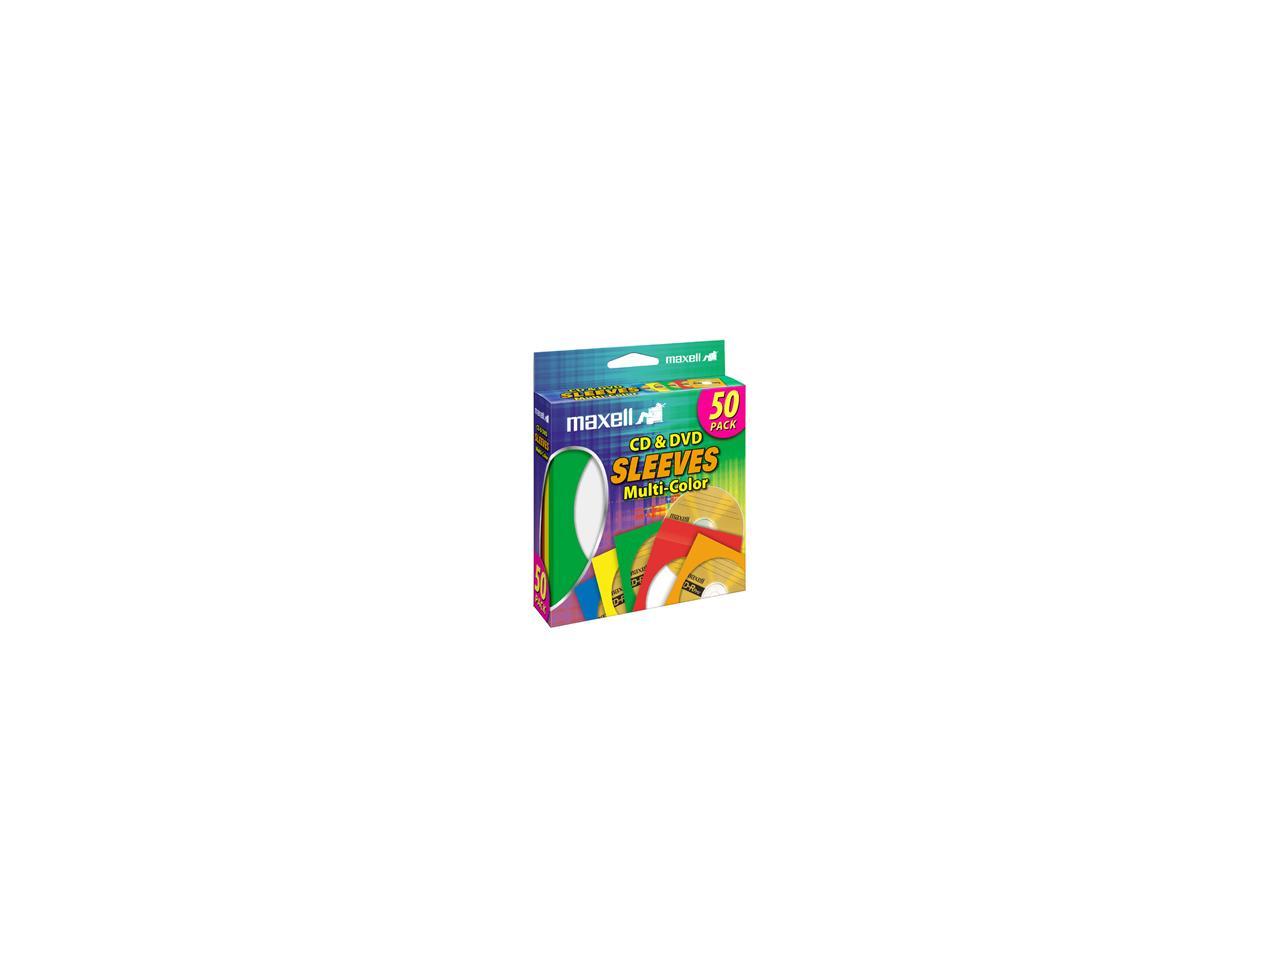 maxell 190134 Multi-Color CD & DVD Sleeve - 50 Pack - image 1 of 2